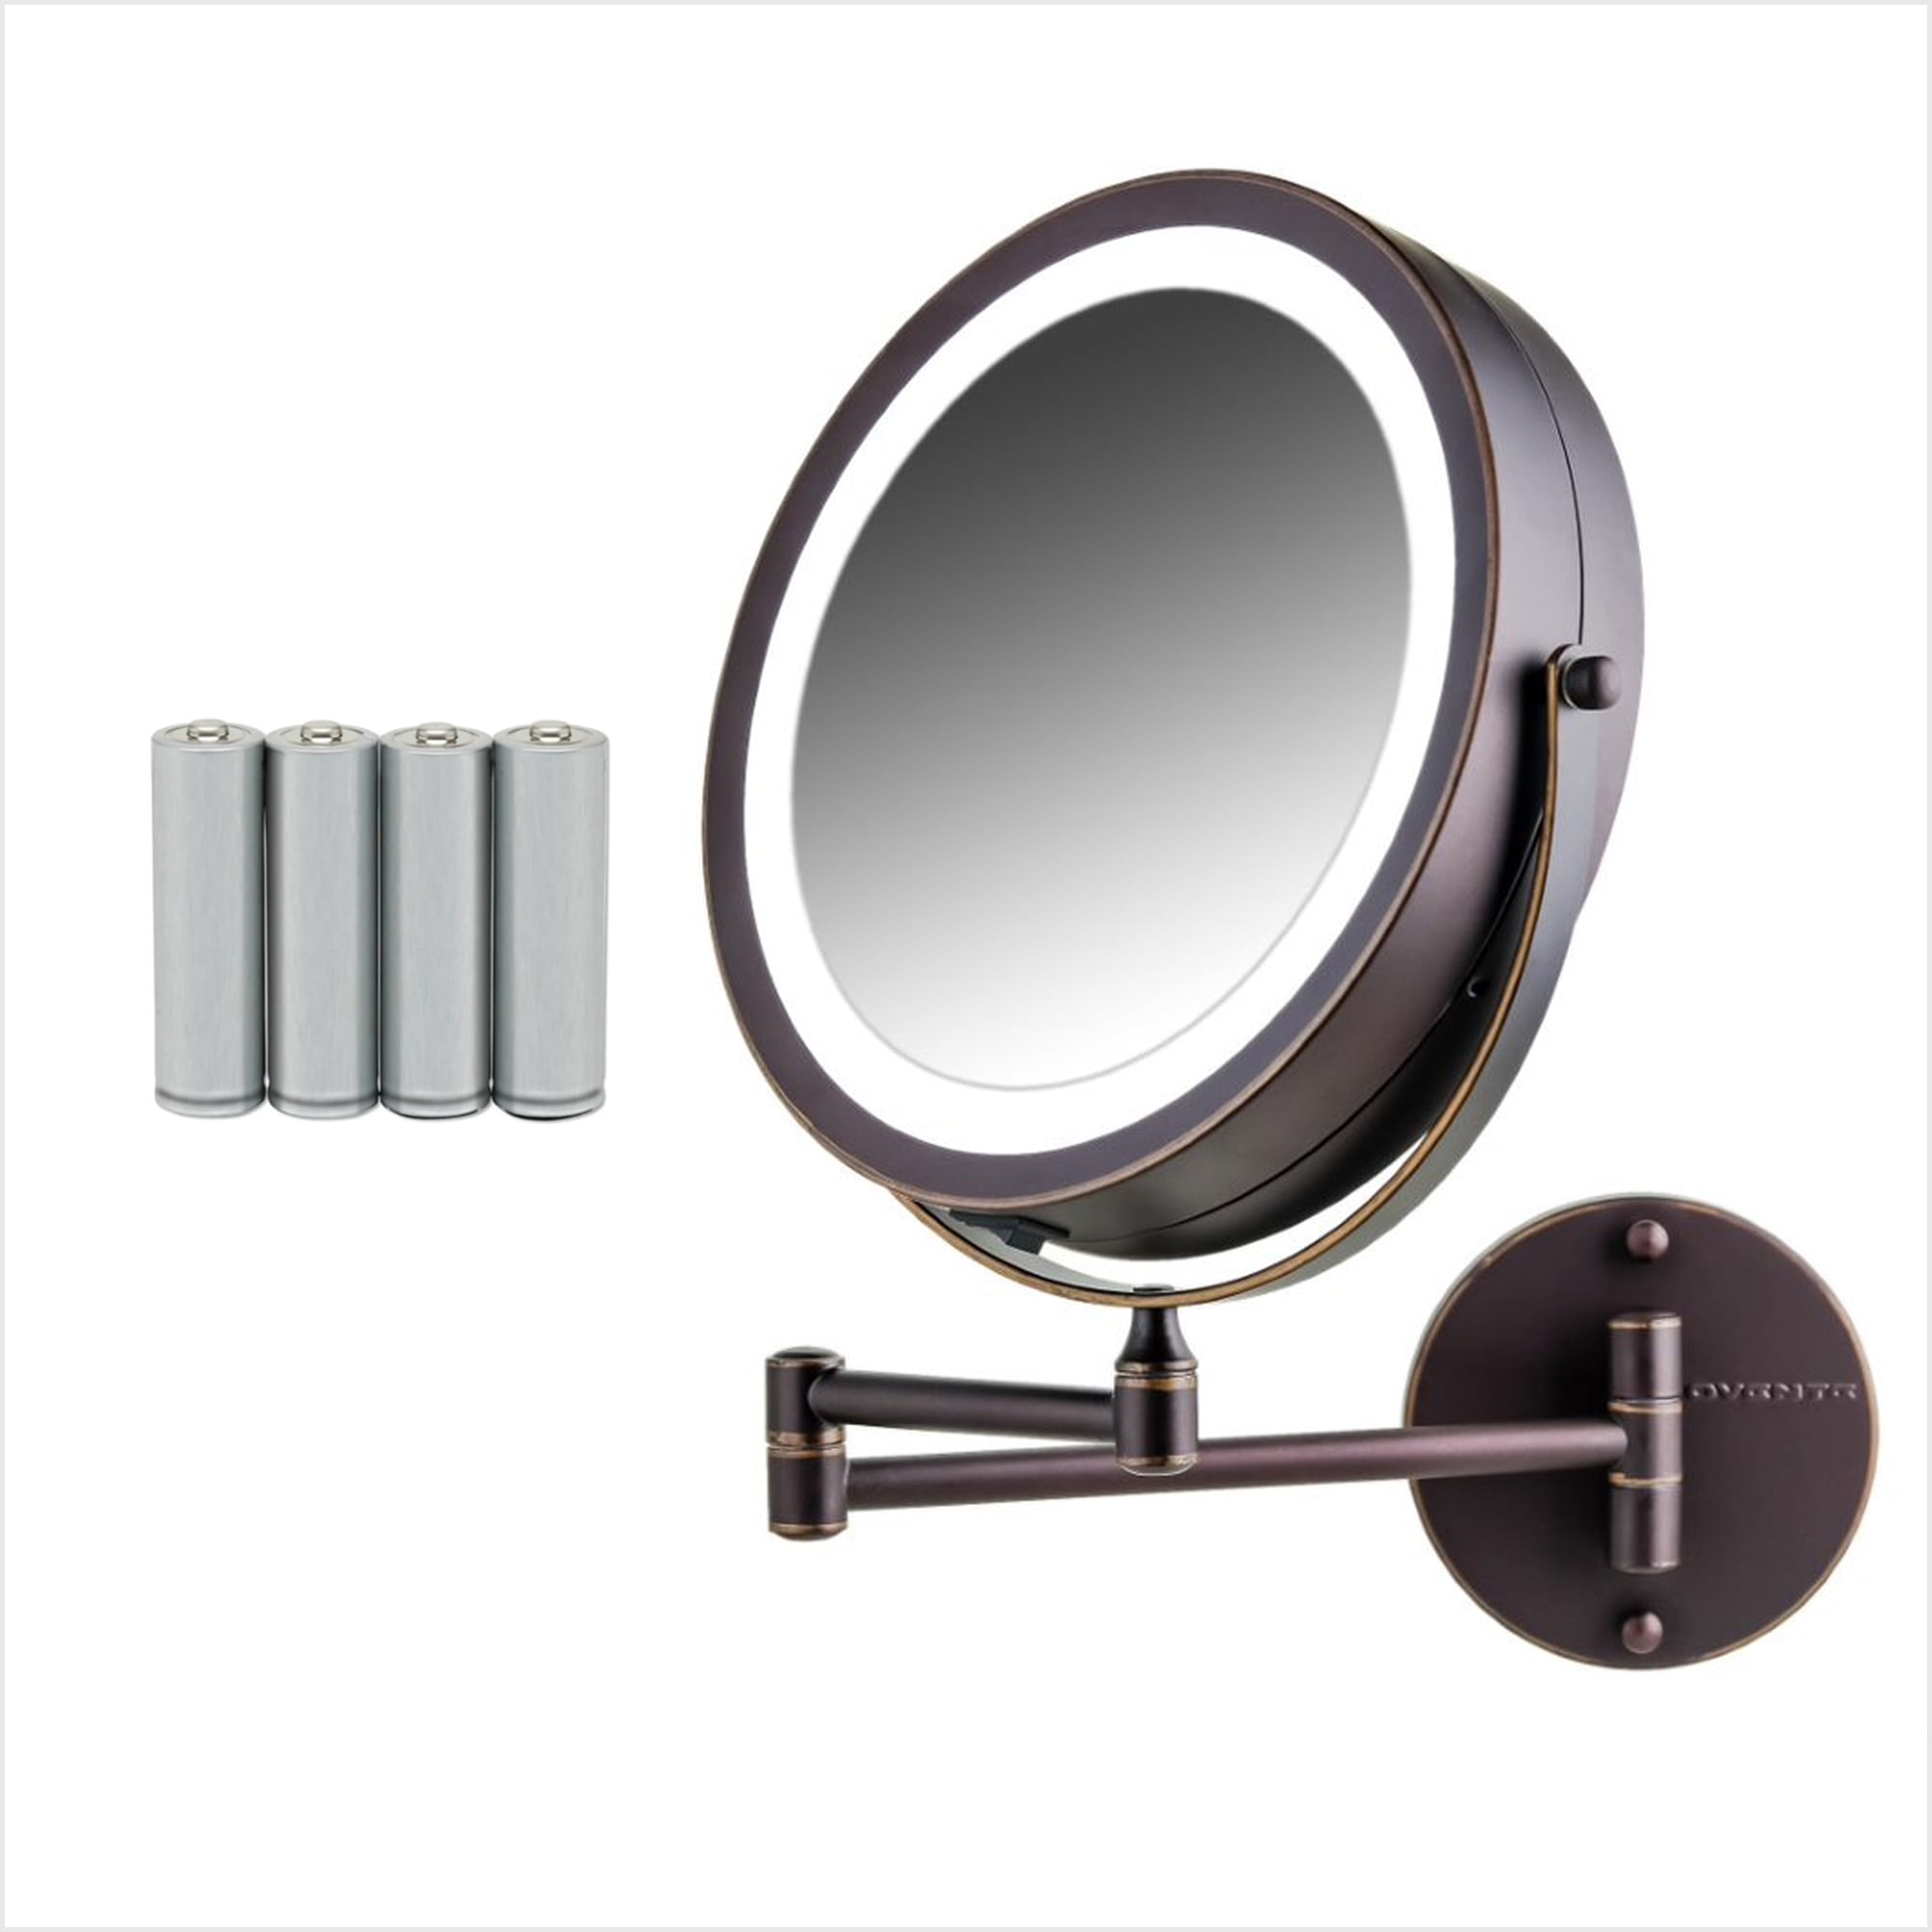 Hotel Quality 8” Wall Mount Magnifying Mirror 1-7X 